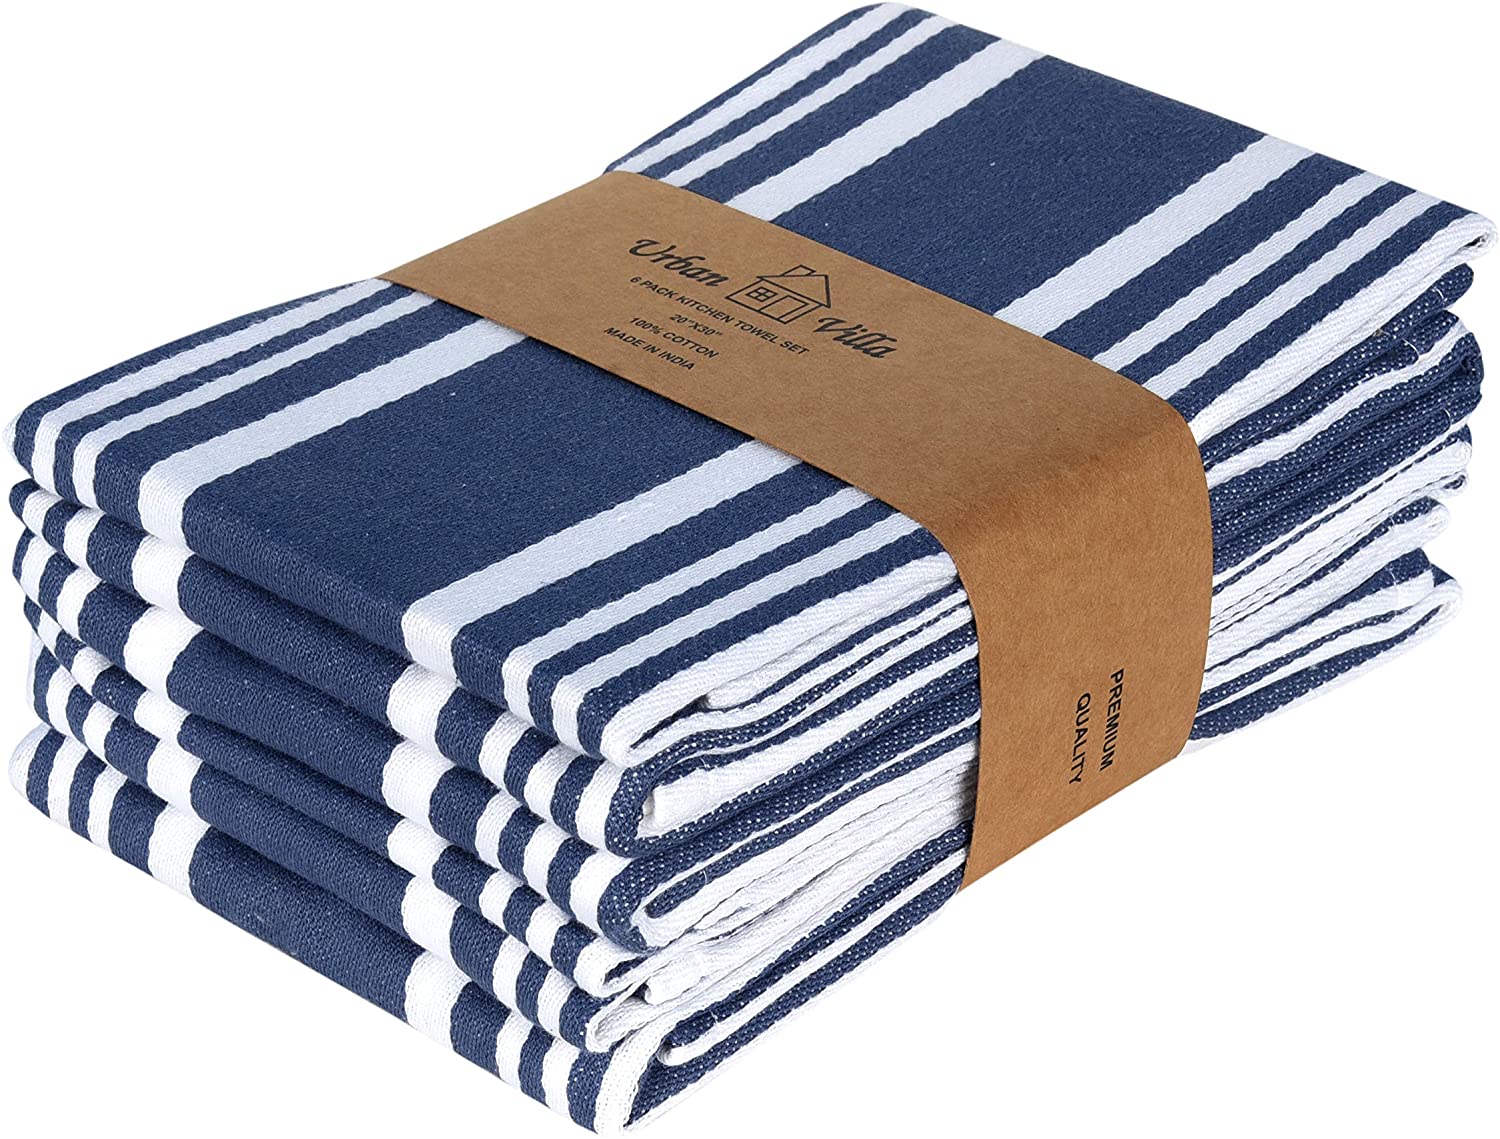 HYER KITCHEN Microfiber Kitchen Towels, Stripe Designed, Super Soft and  Absorbent Dish Towels, Pack of 8, 18 x 26 Inch, Green and White